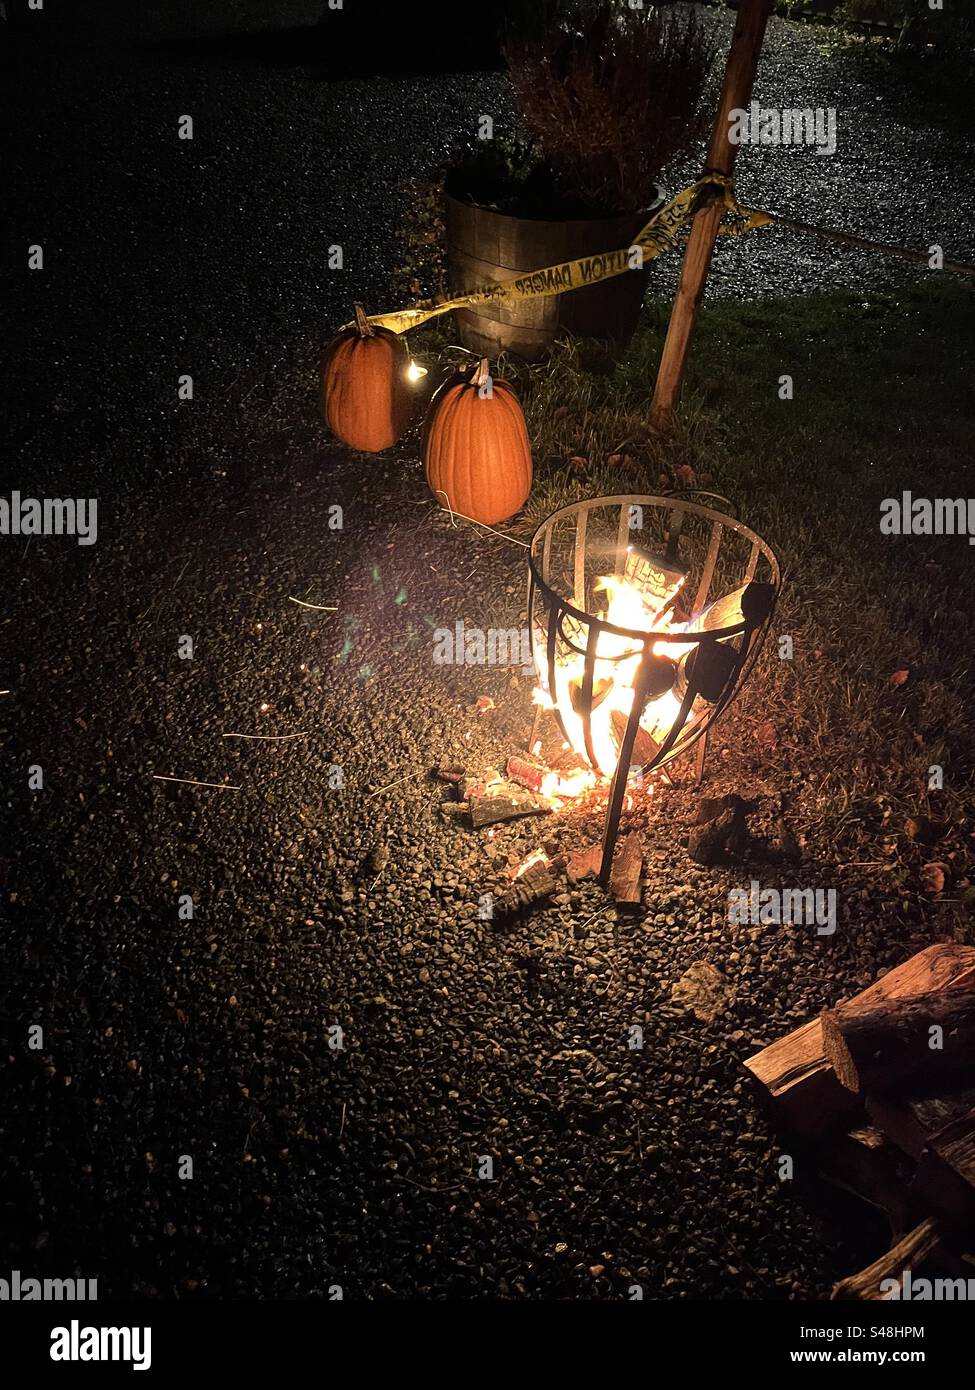 Small fire and pumpkins at Helloween celebration. Stock Photo